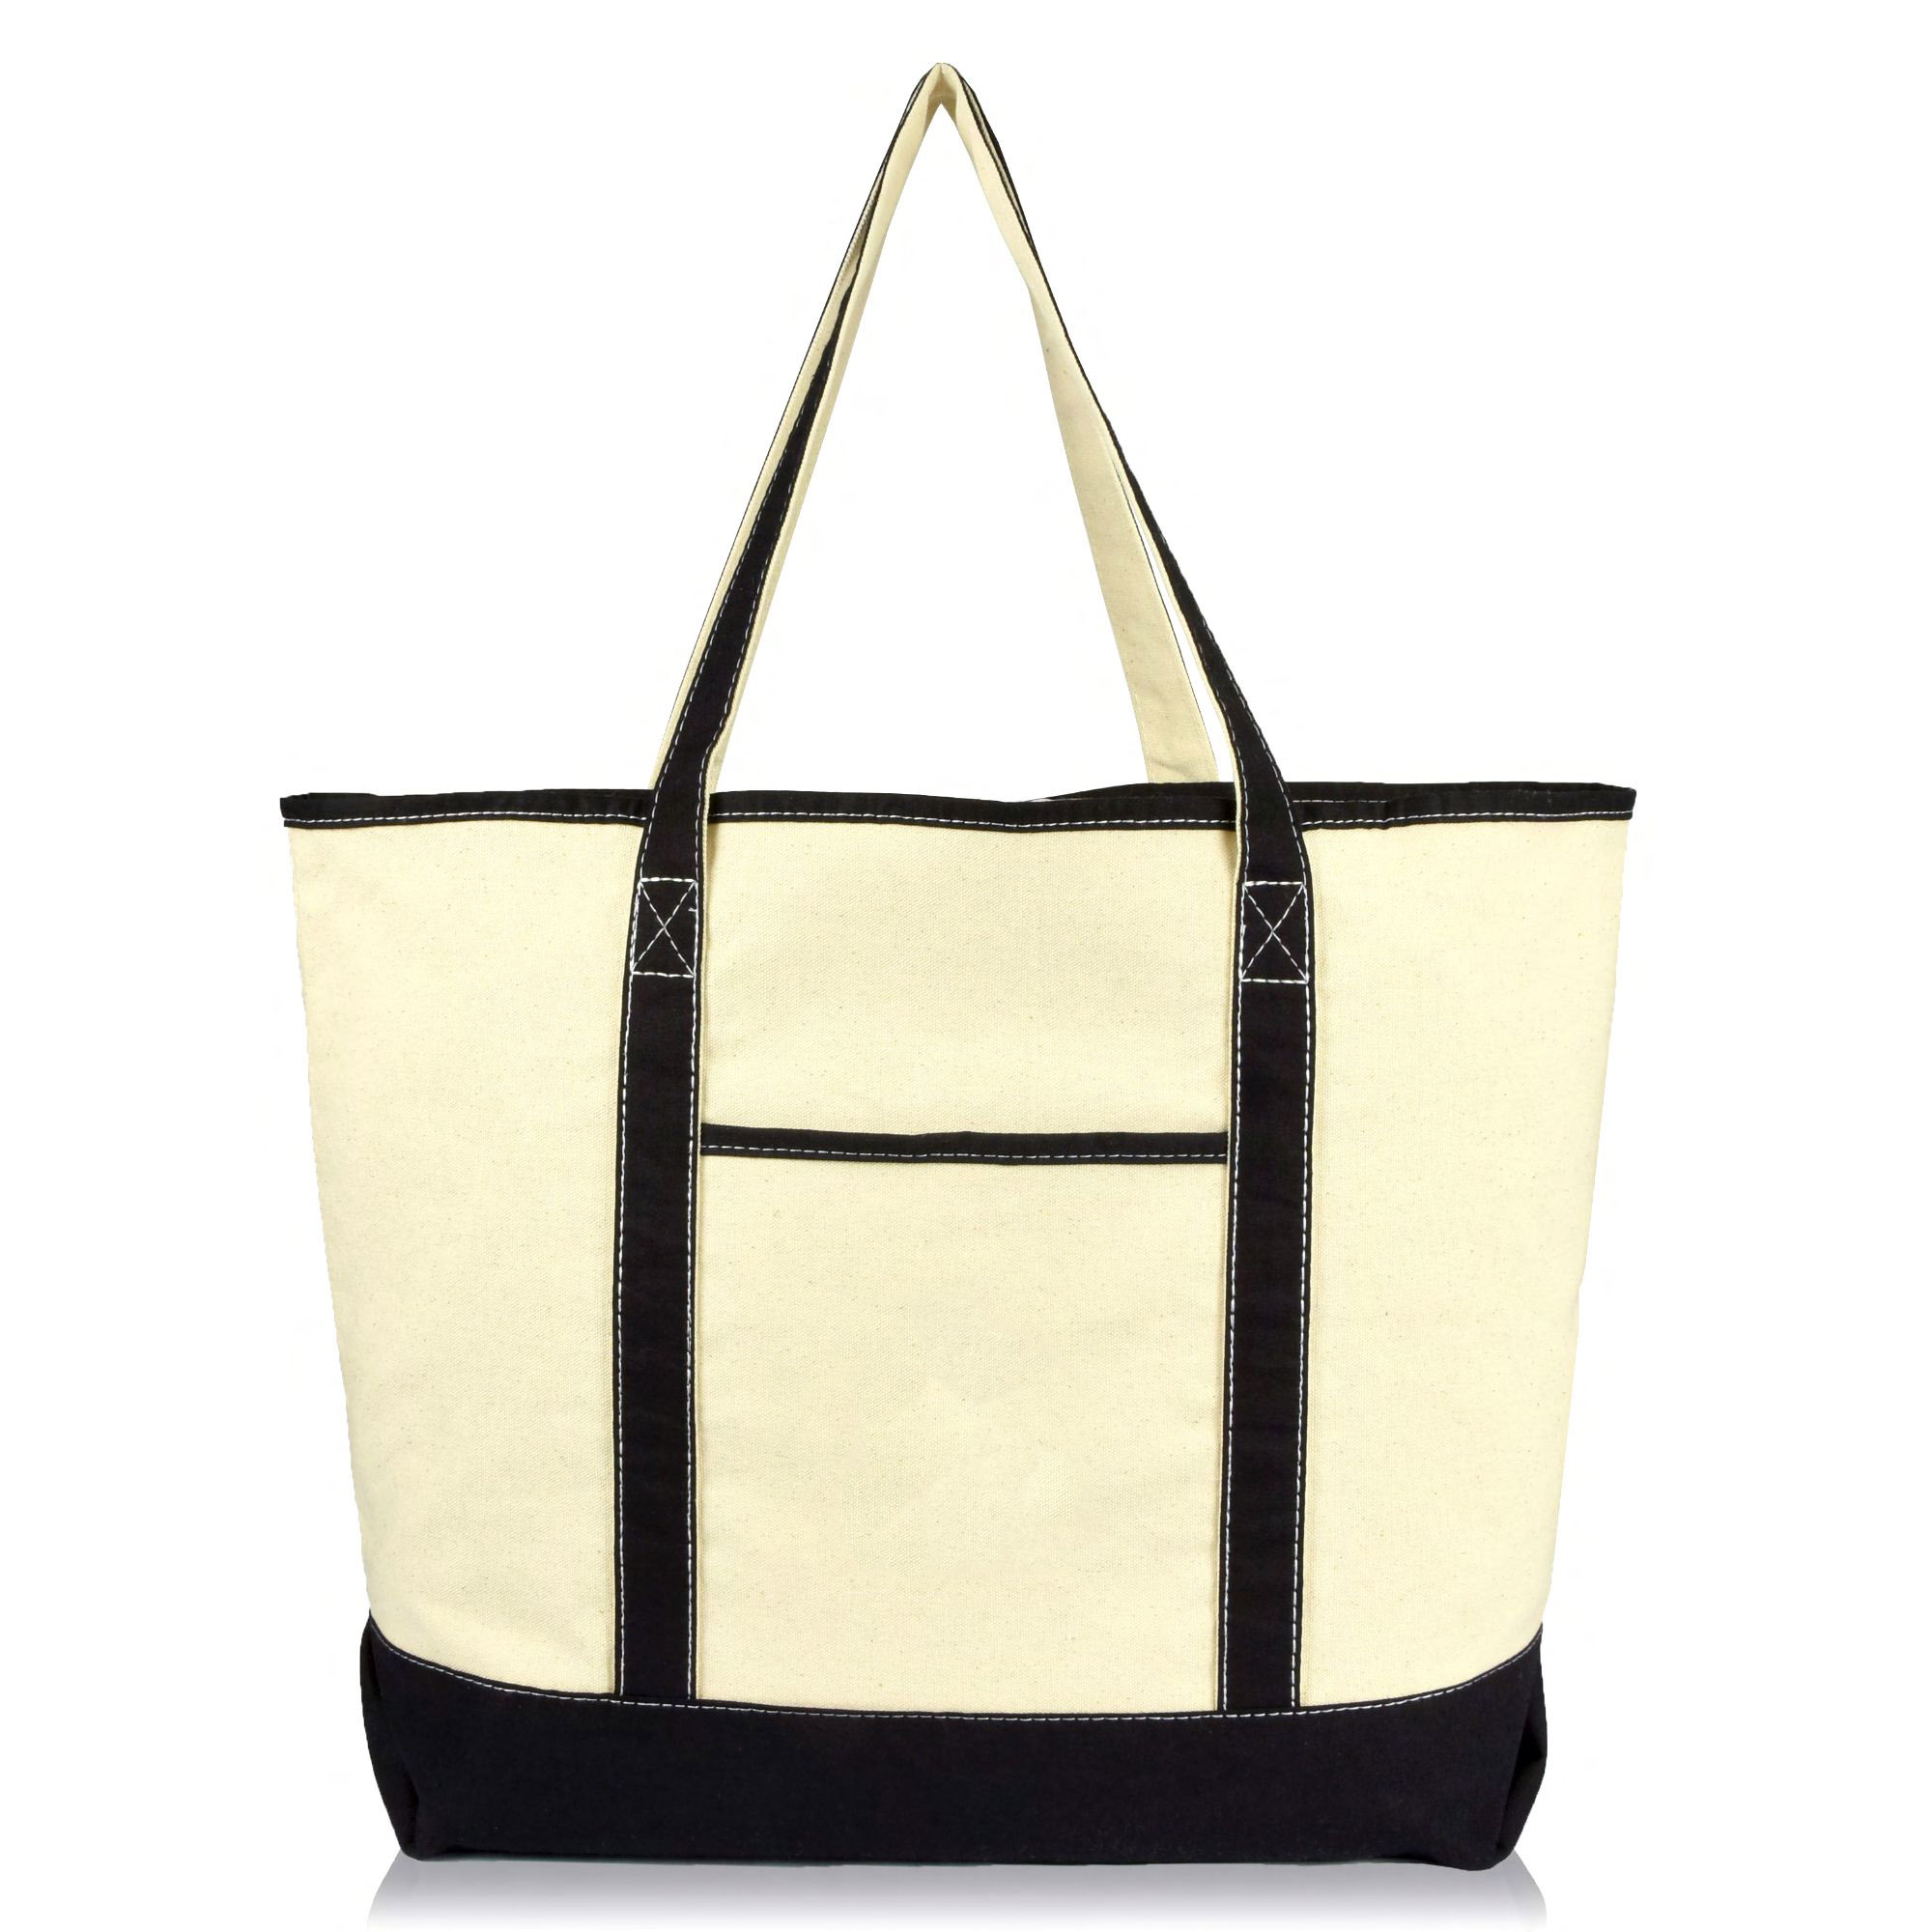 DALIX 22" Open Top Deluxe Tote Bag with Outer Pocket in Black - image 1 of 5